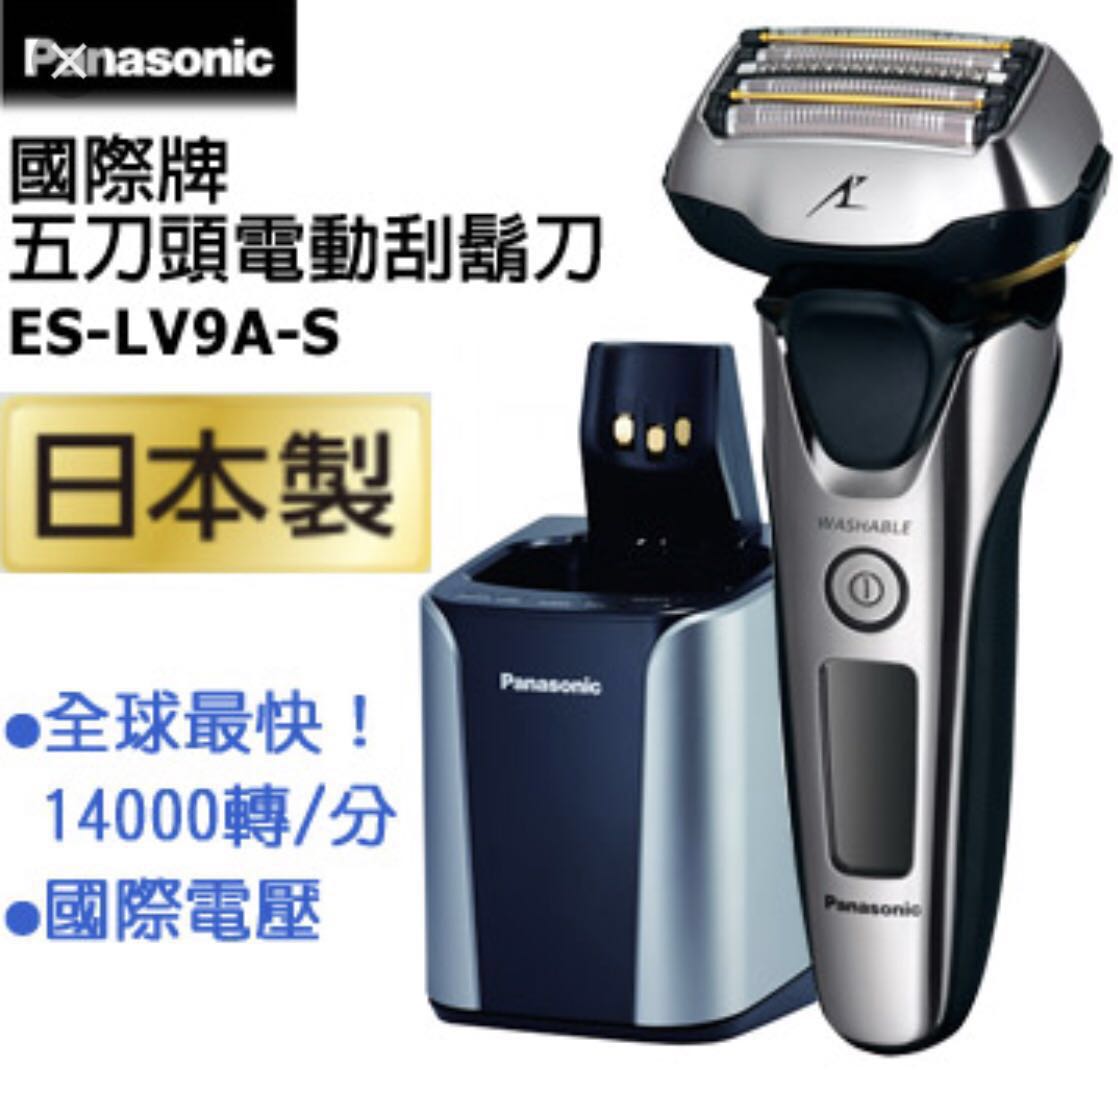 Panasonic Es Lv9a 5 Blade Electric Shaver Silver Tone Health Beauty Men S Grooming On Carousell